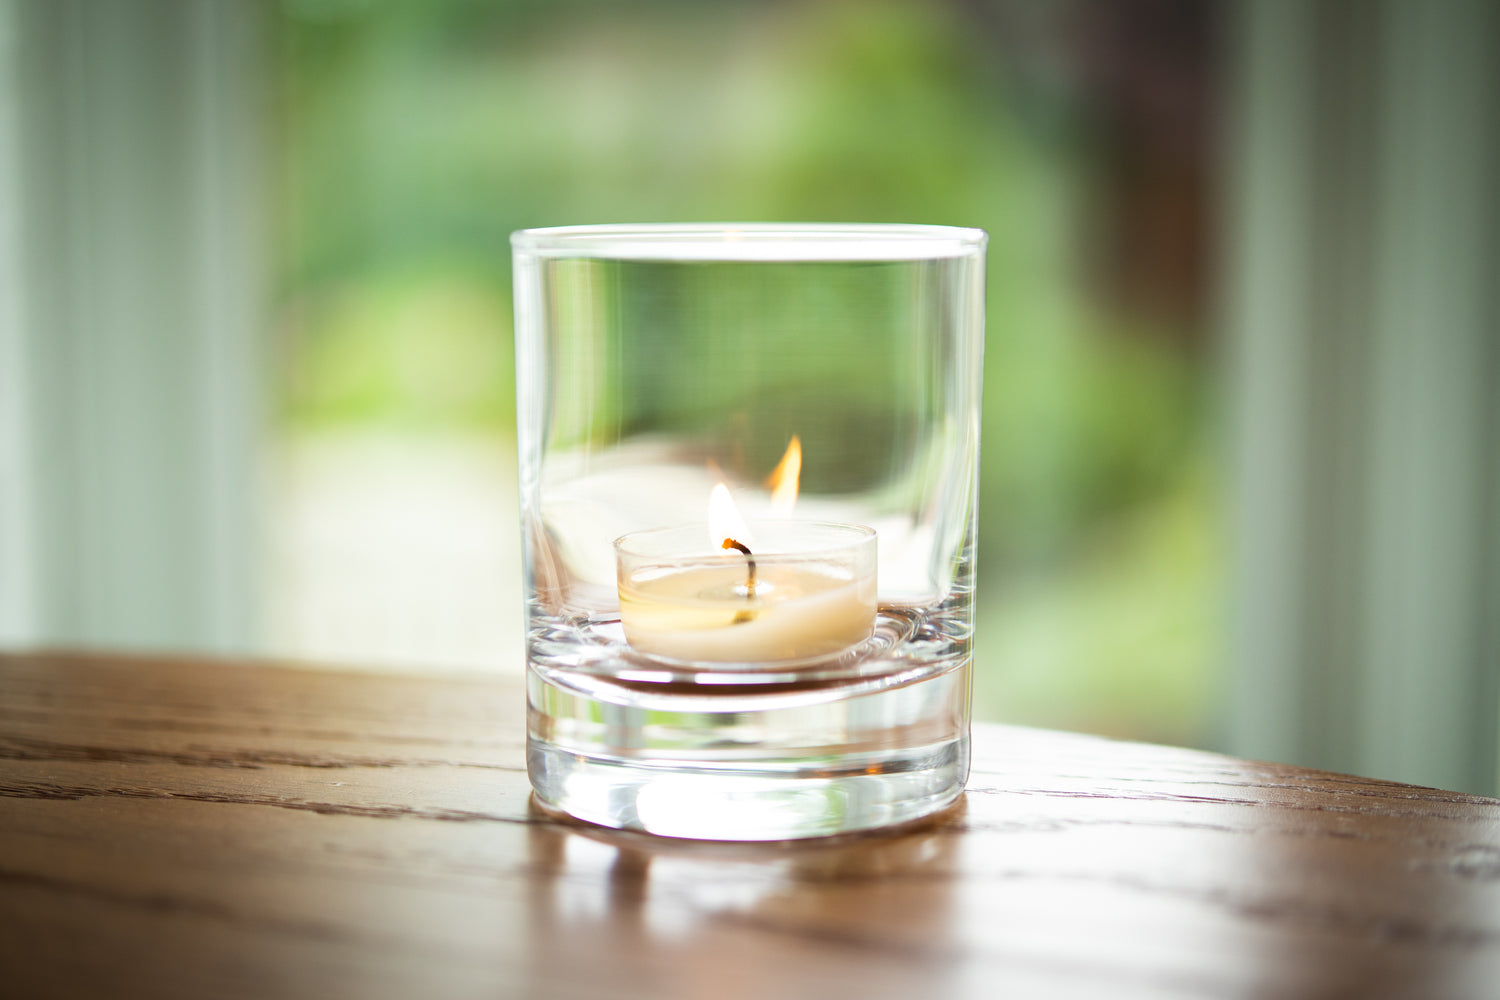 Canoe Candle Co's 7oz tealight rocks glass with tealight burning inside, sitting on a wooden table in front of window.